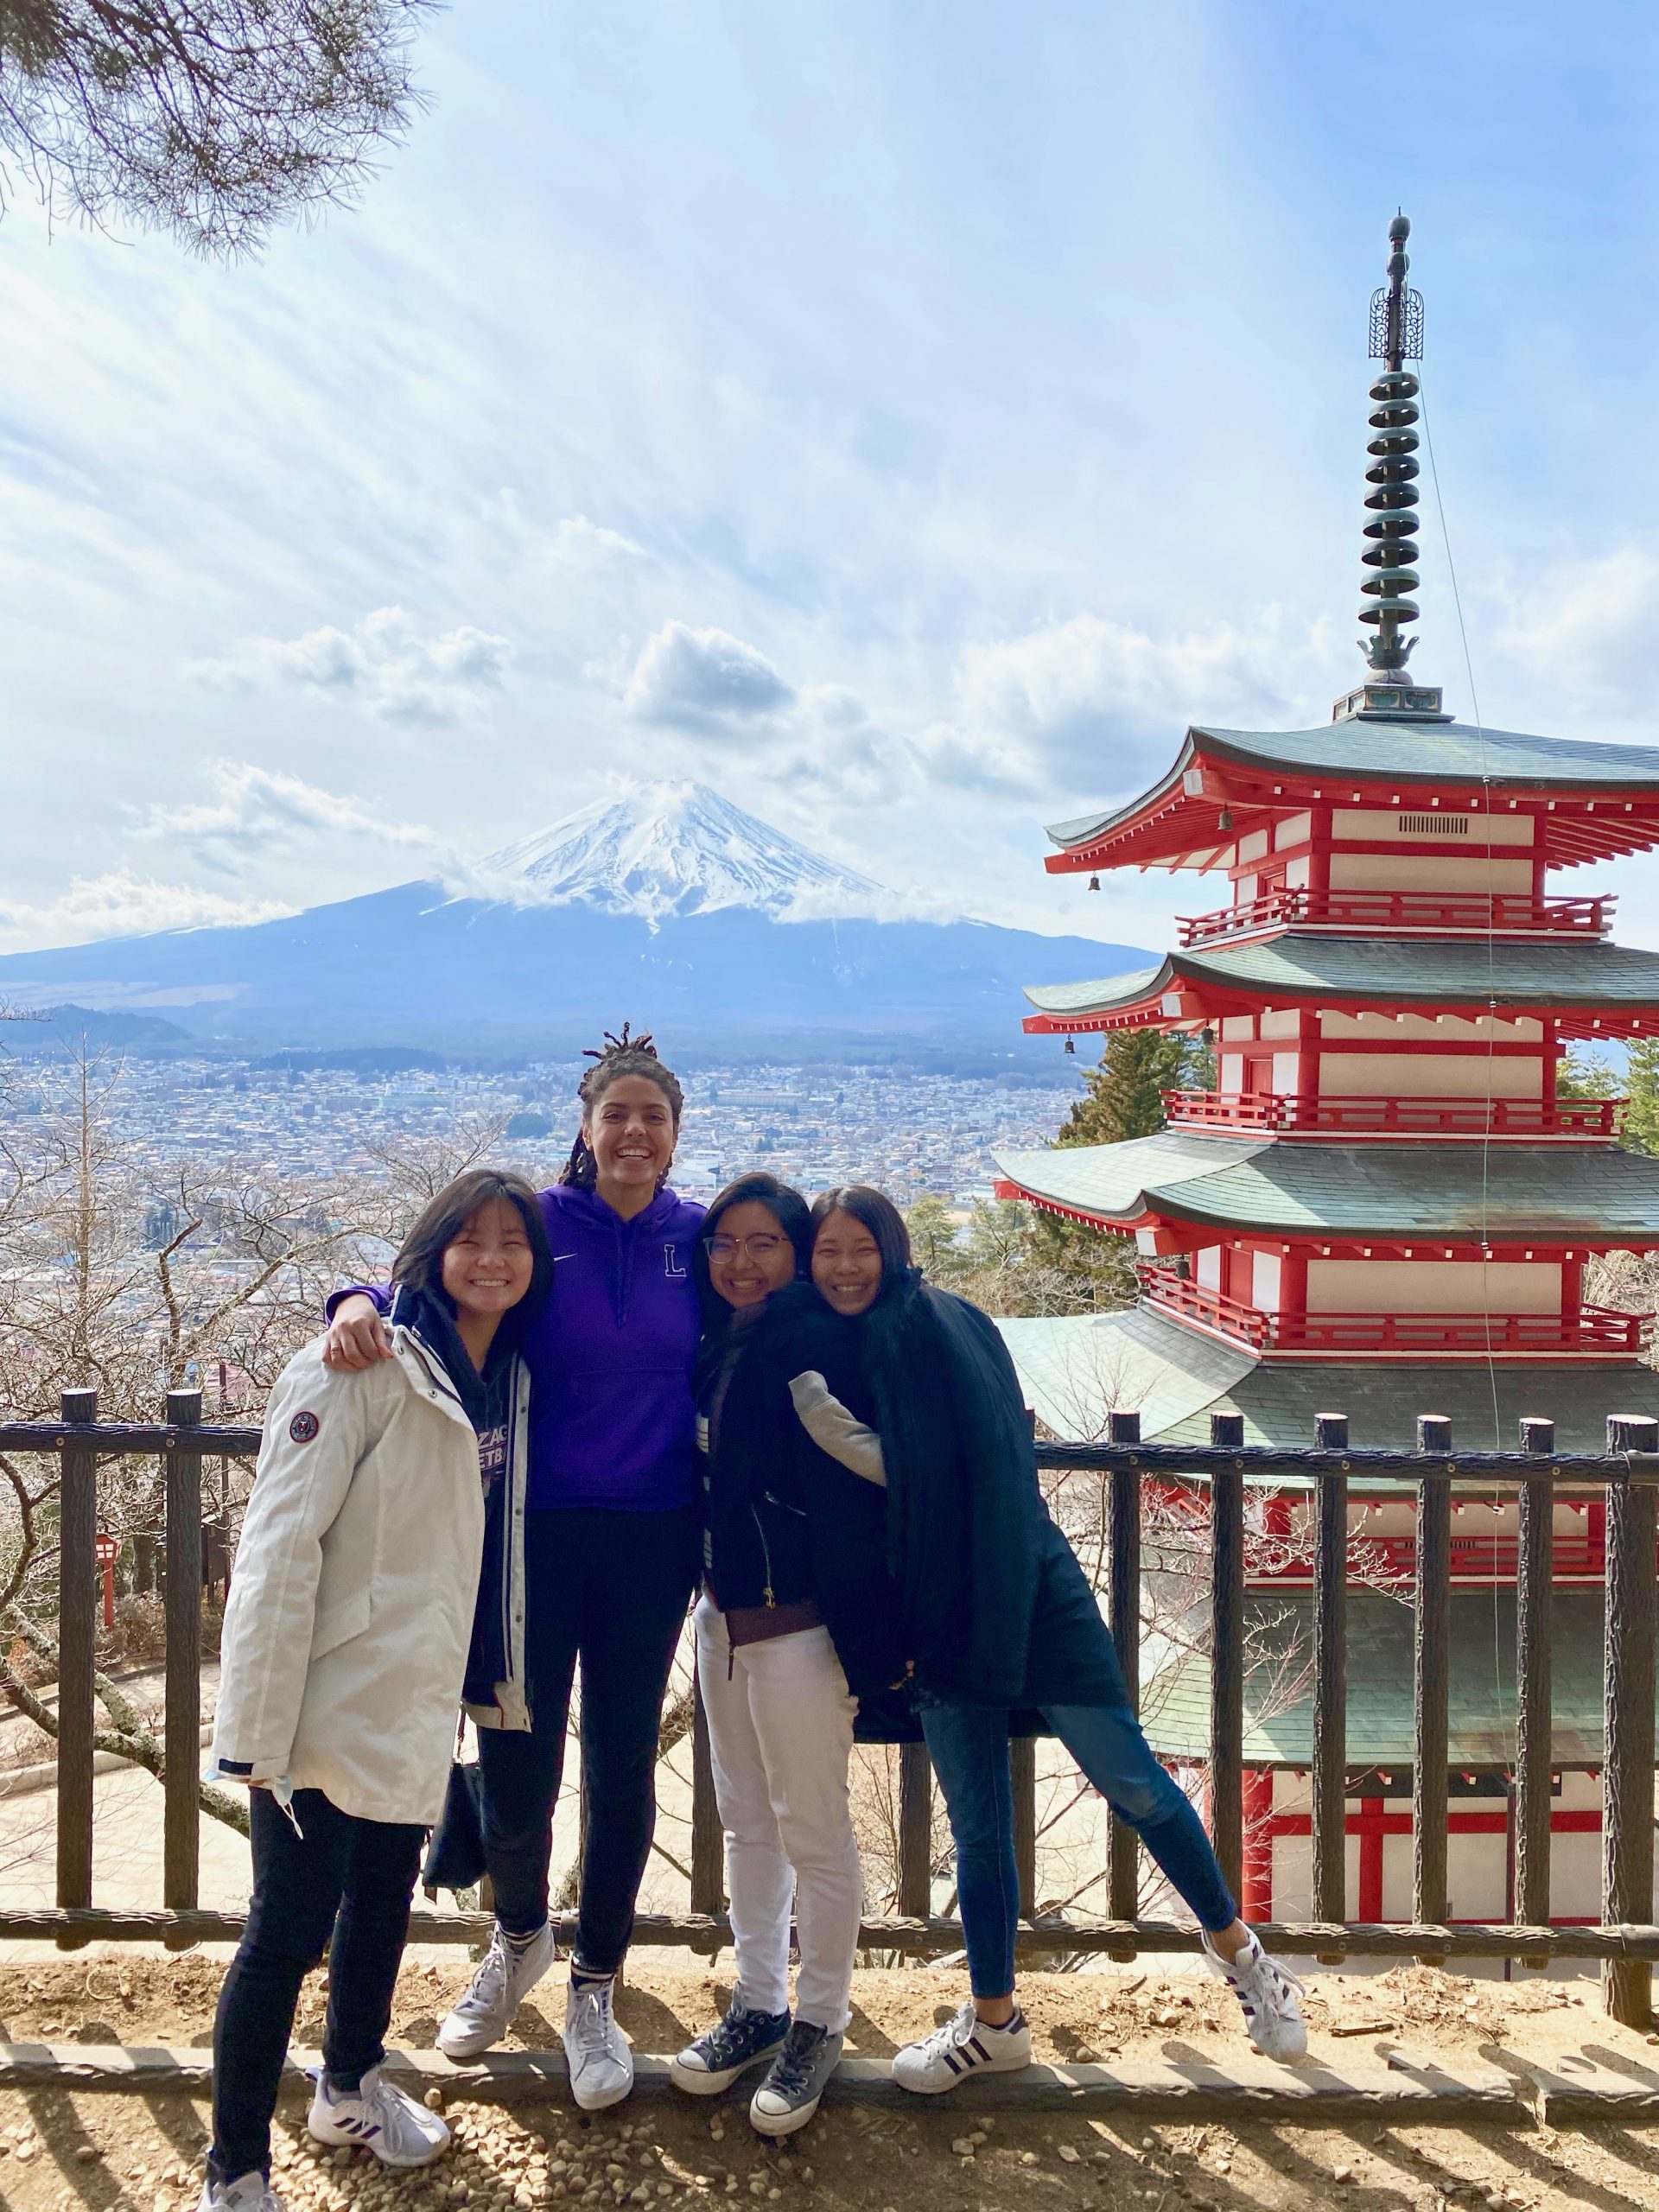 Me, Isis, Marina, and Emi posing in front of Mt. Fuji and a red/green temple